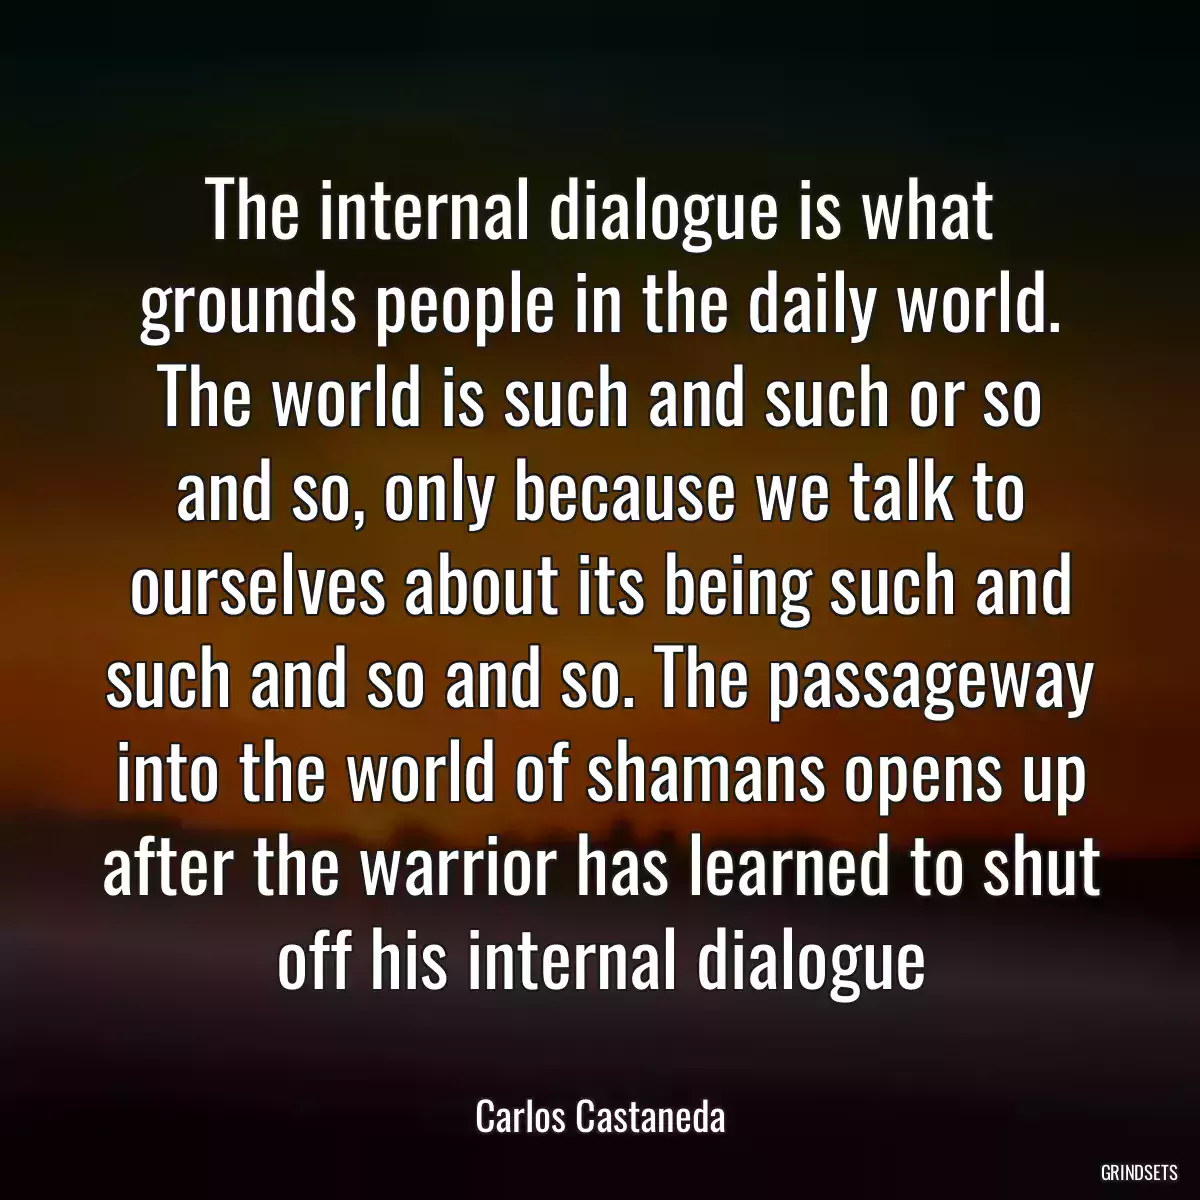 The internal dialogue is what grounds people in the daily world. The world is such and such or so and so, only because we talk to ourselves about its being such and such and so and so. The passageway into the world of shamans opens up after the warrior has learned to shut off his internal dialogue